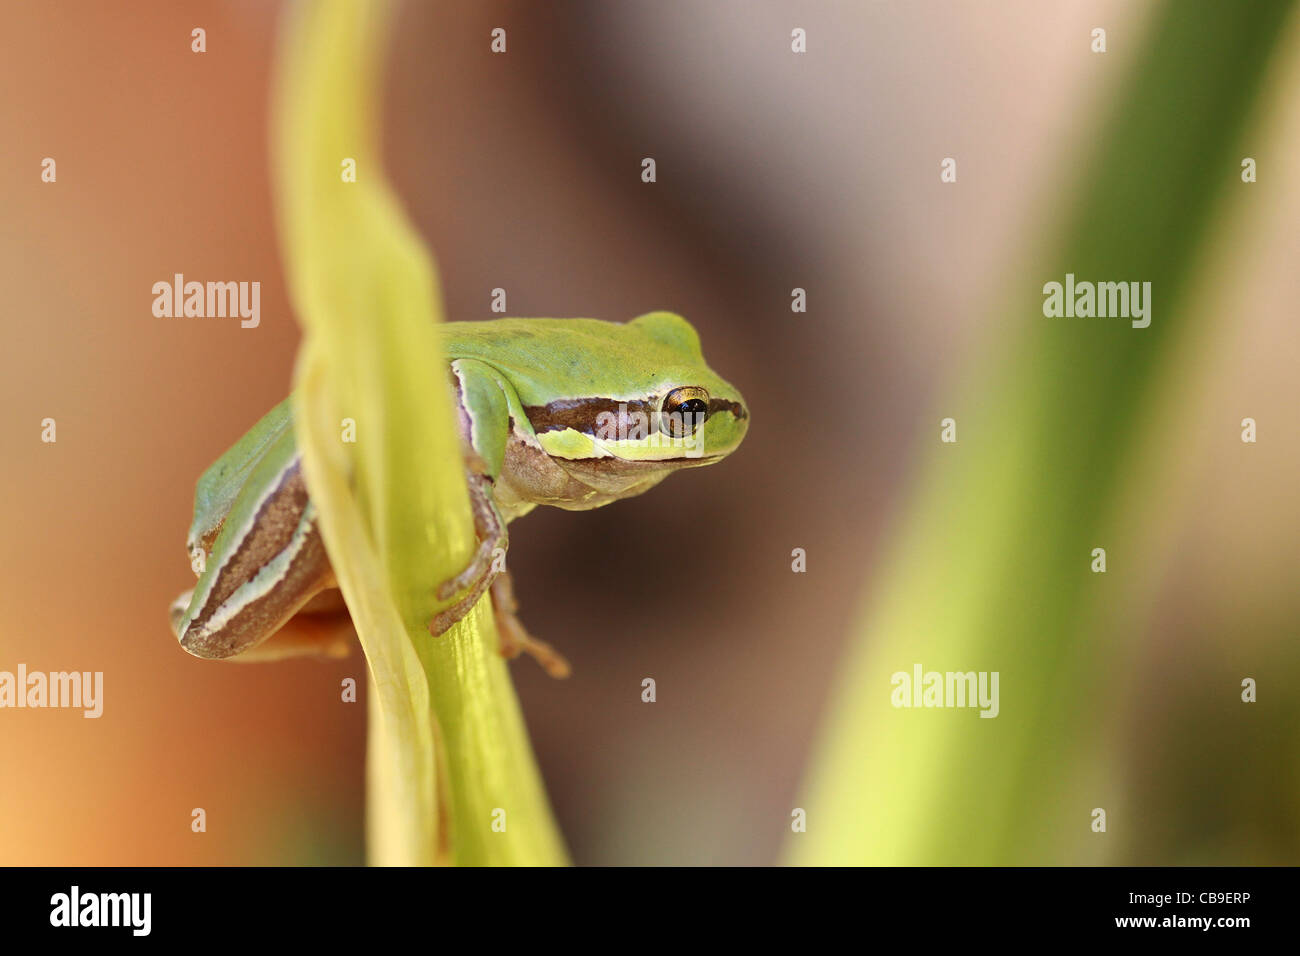 European tree frog, Hyla arborea, Photographed in Israel in October Stock Photo